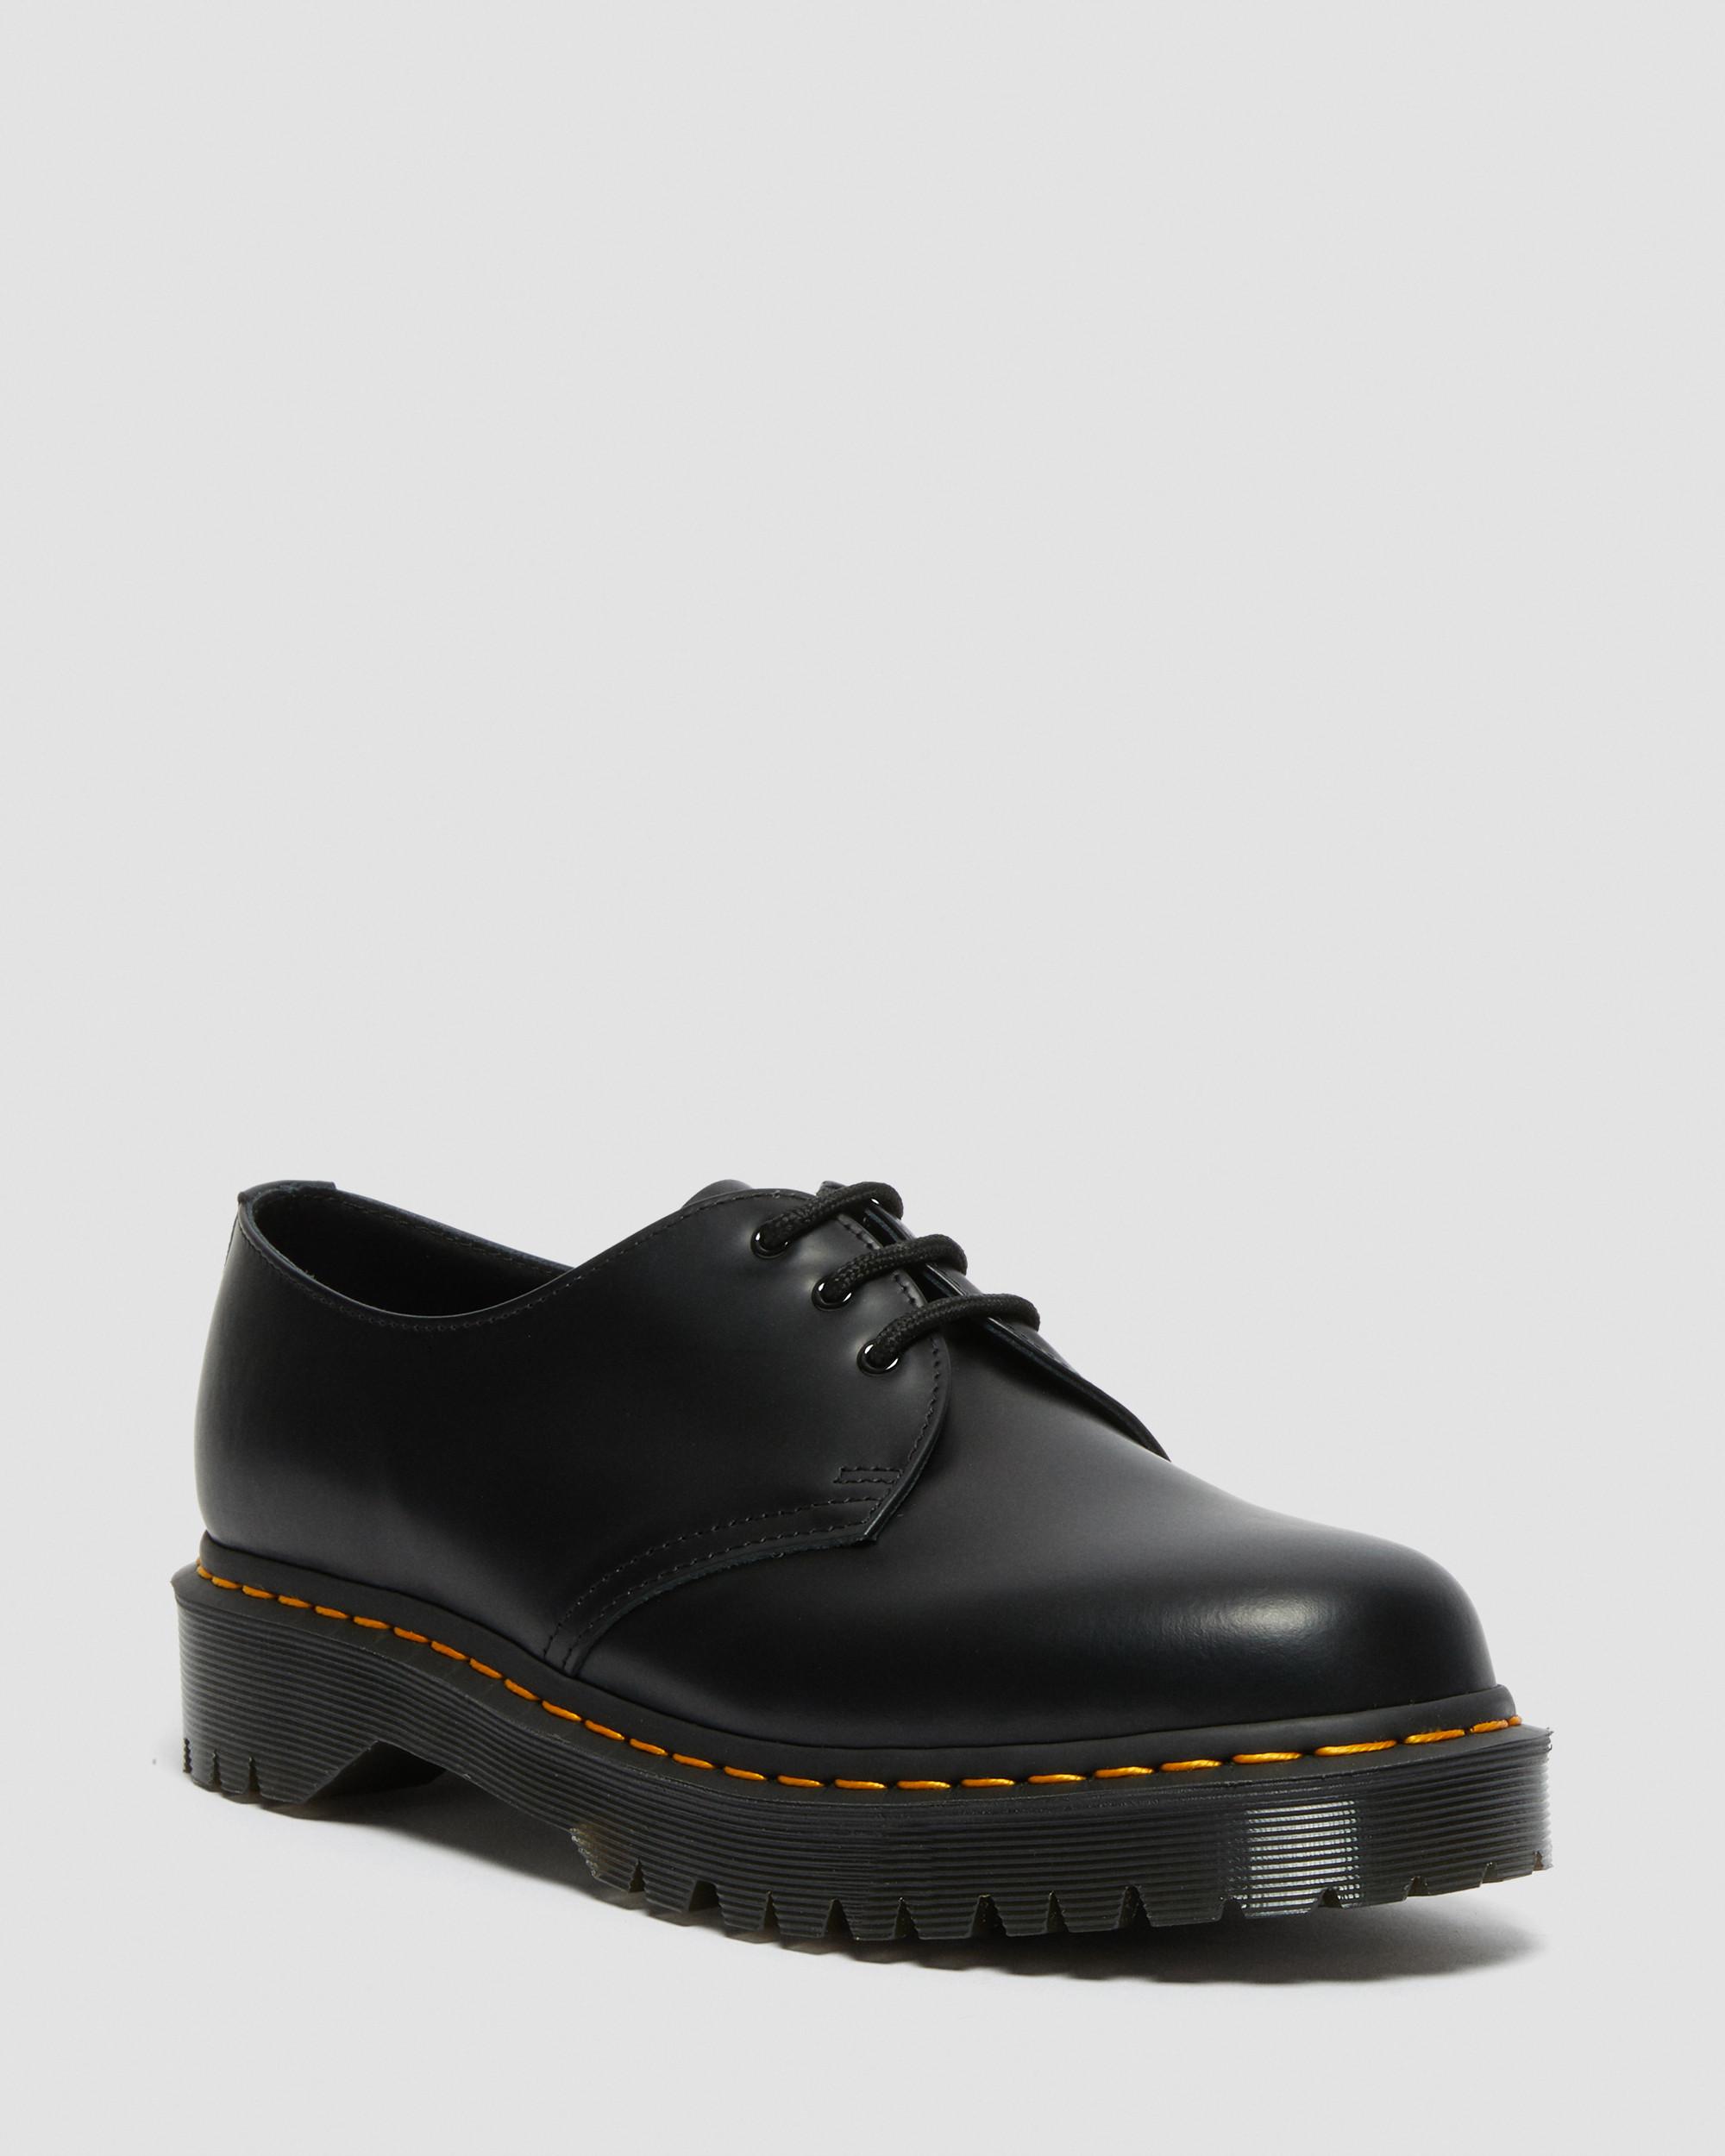 1461 Bex Smooth Leather Oxford Shoes in Black